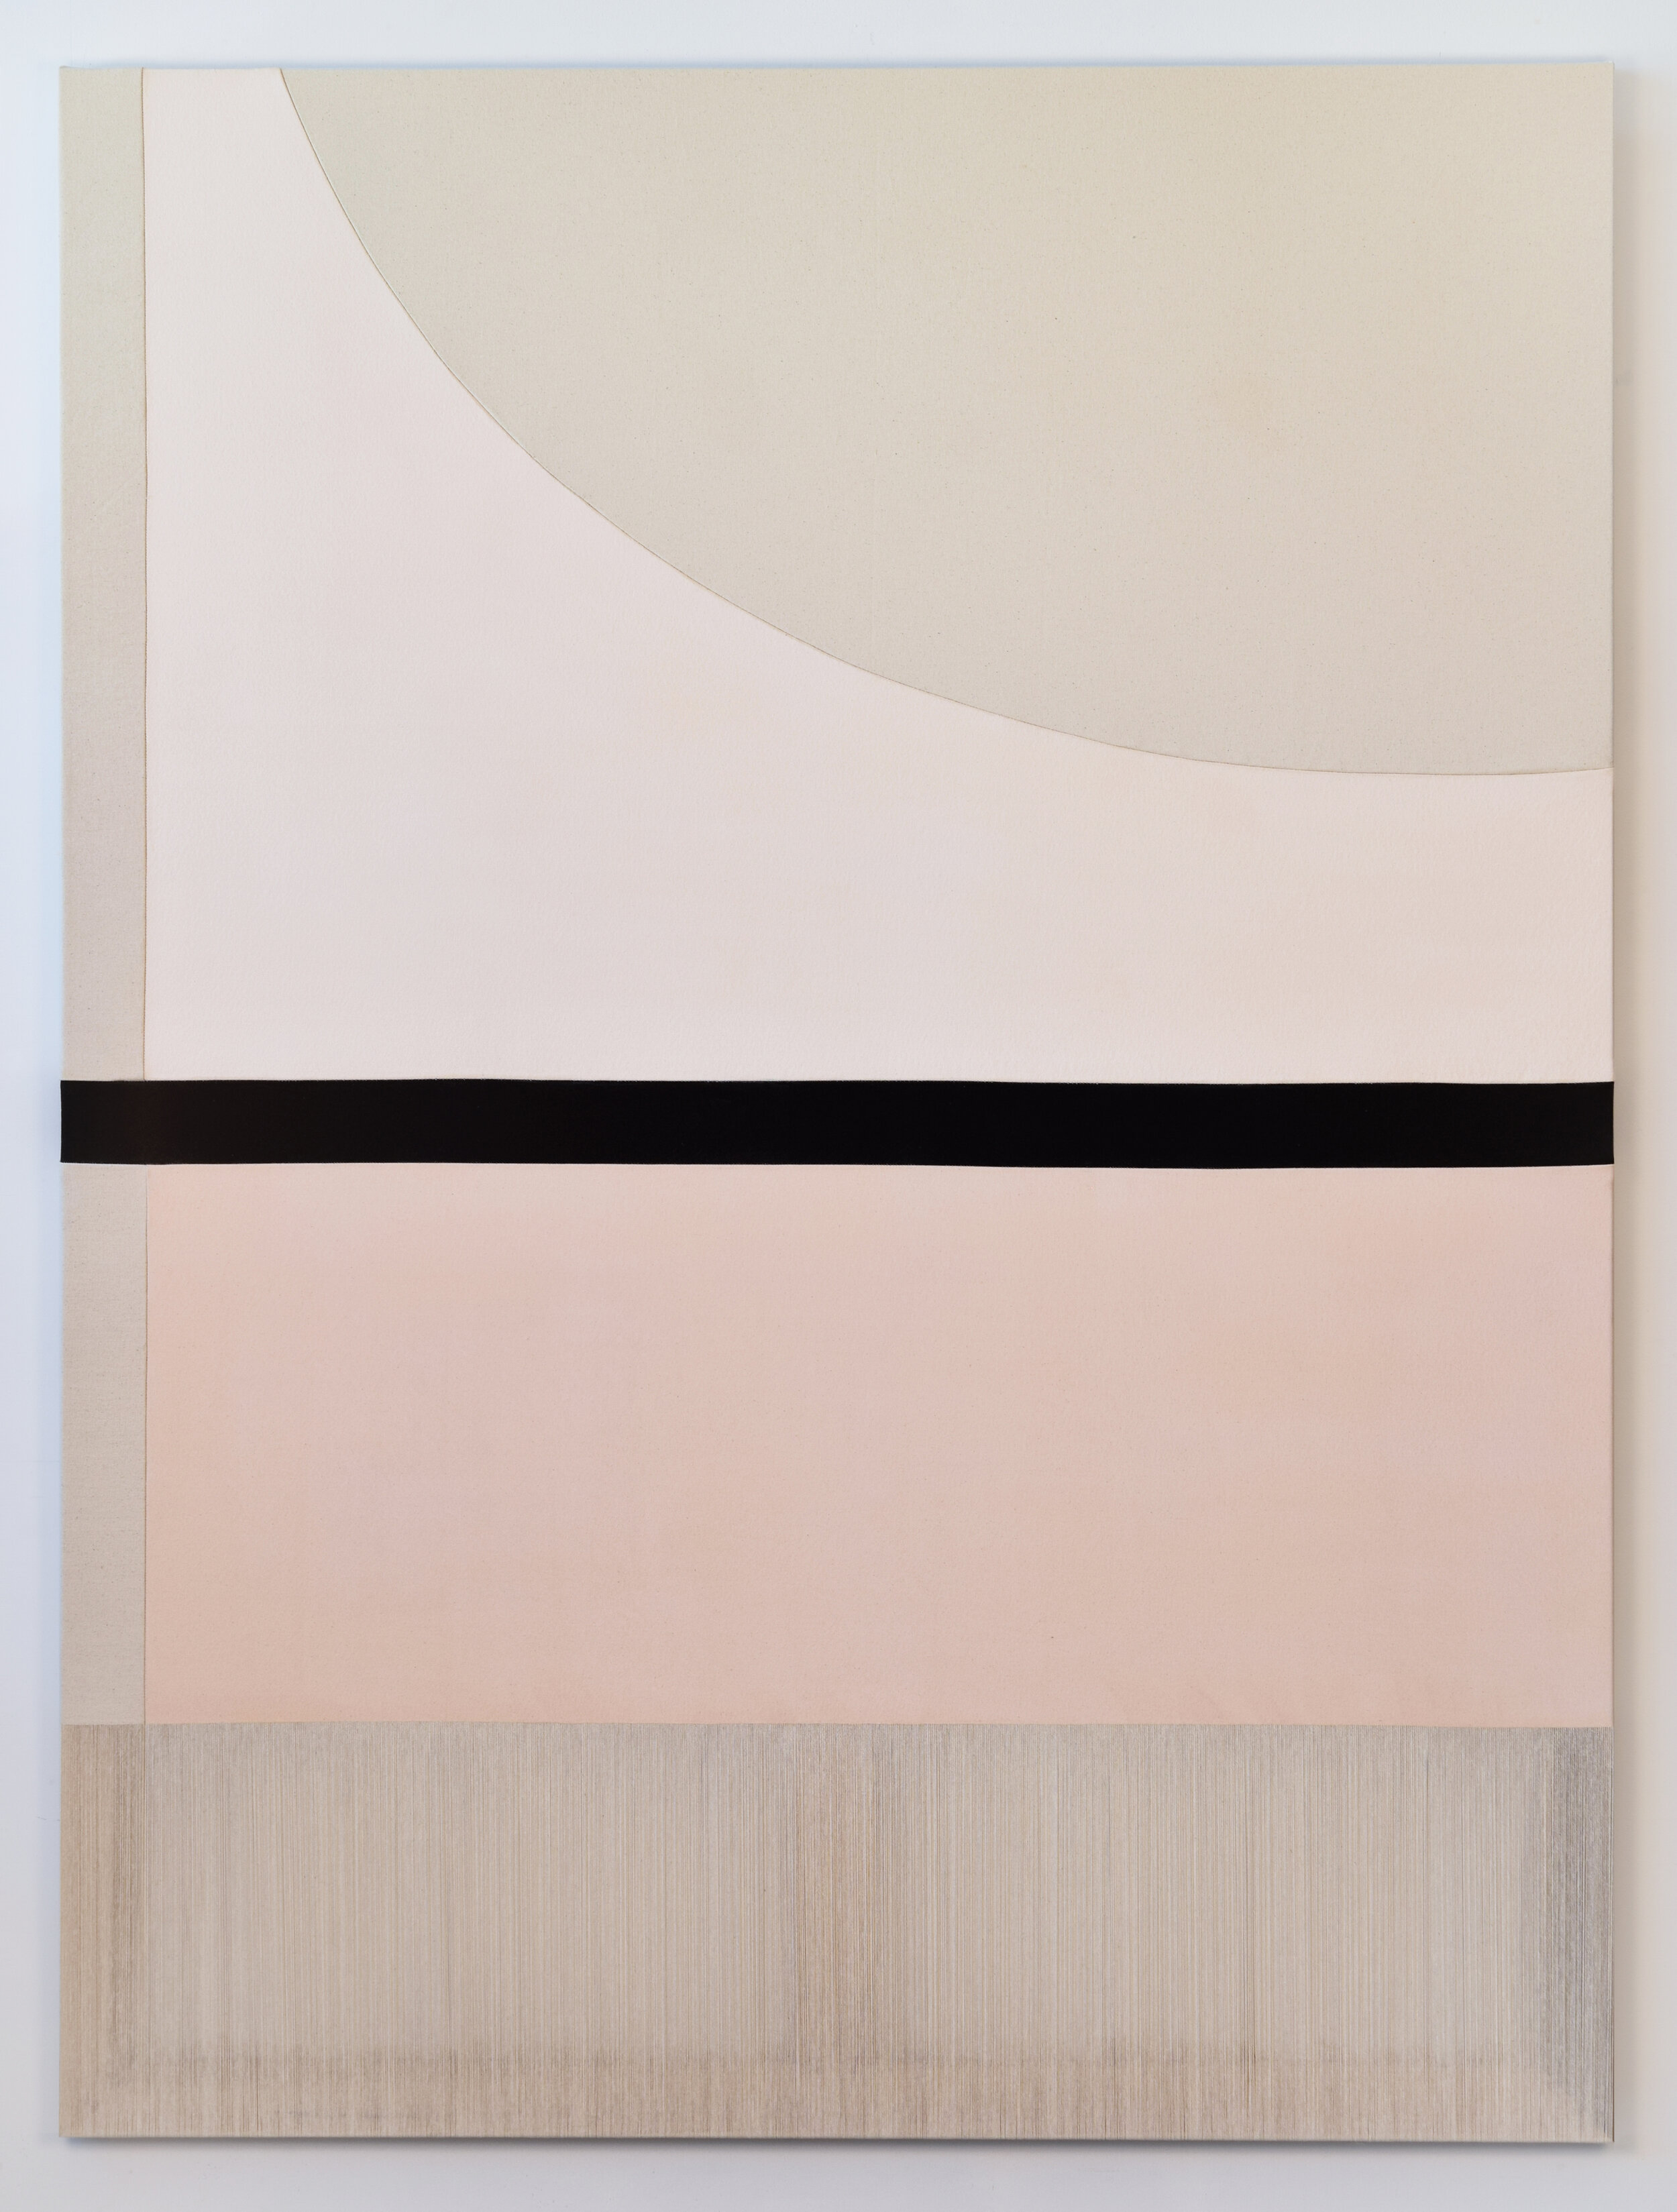   half-moon  2020 acrylic on stitched canvas 64 in x 48 in 